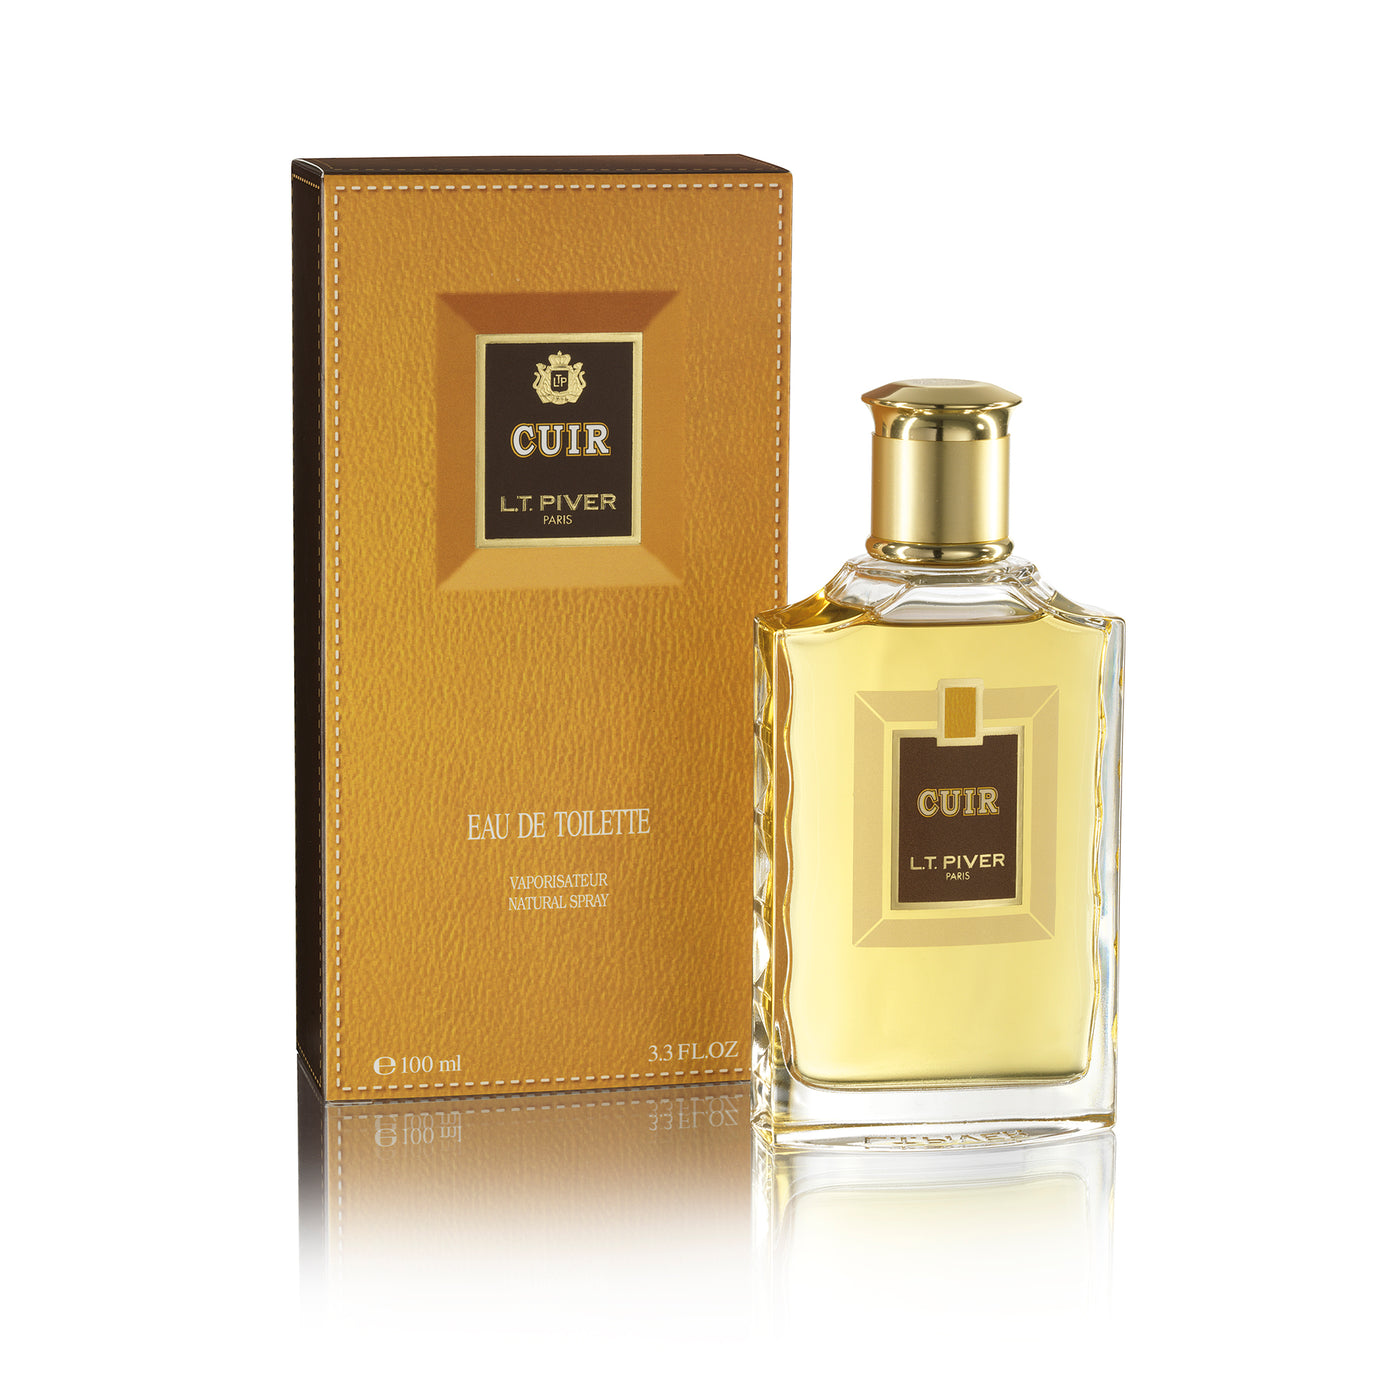 L.T. Piver Cuir EDT 100ml